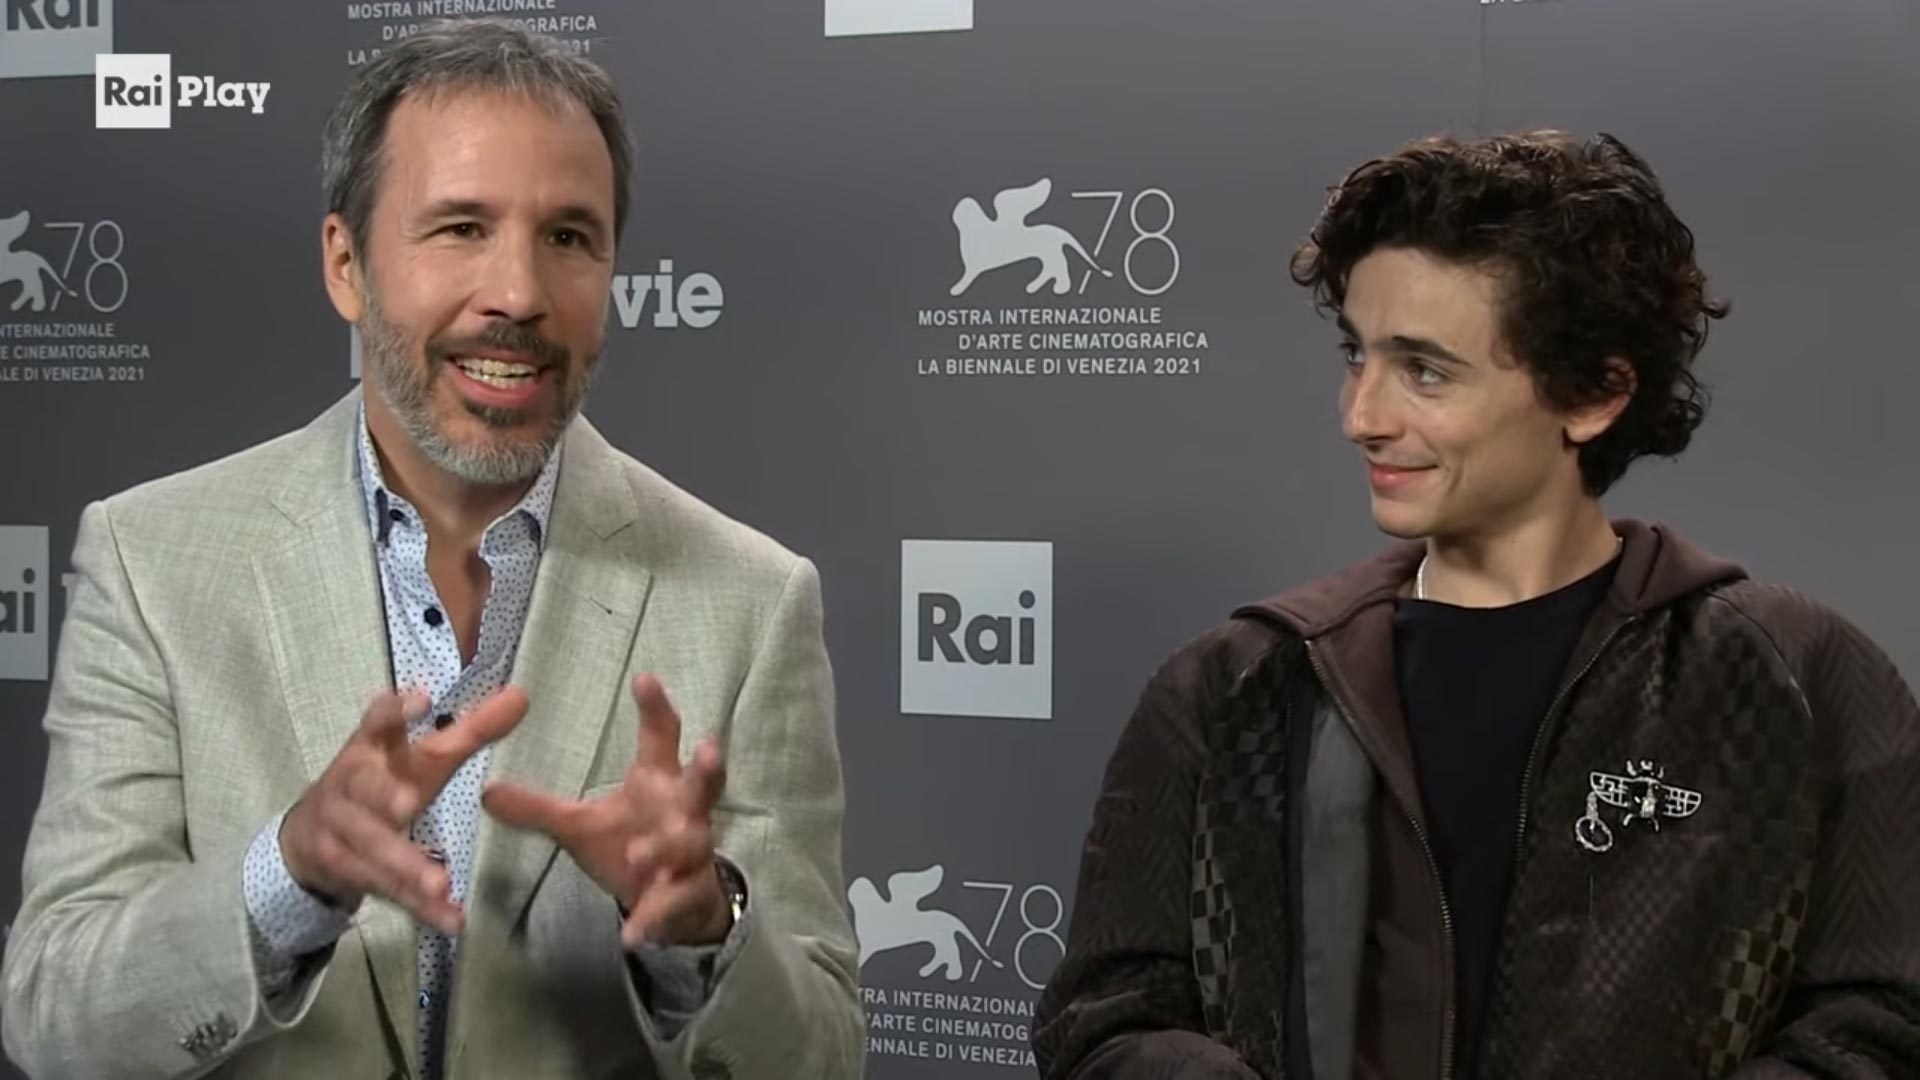 Denis Villeneuve and Timothée Chalamet talk about the Dune (2021) movie, in an interview with Rai Play.